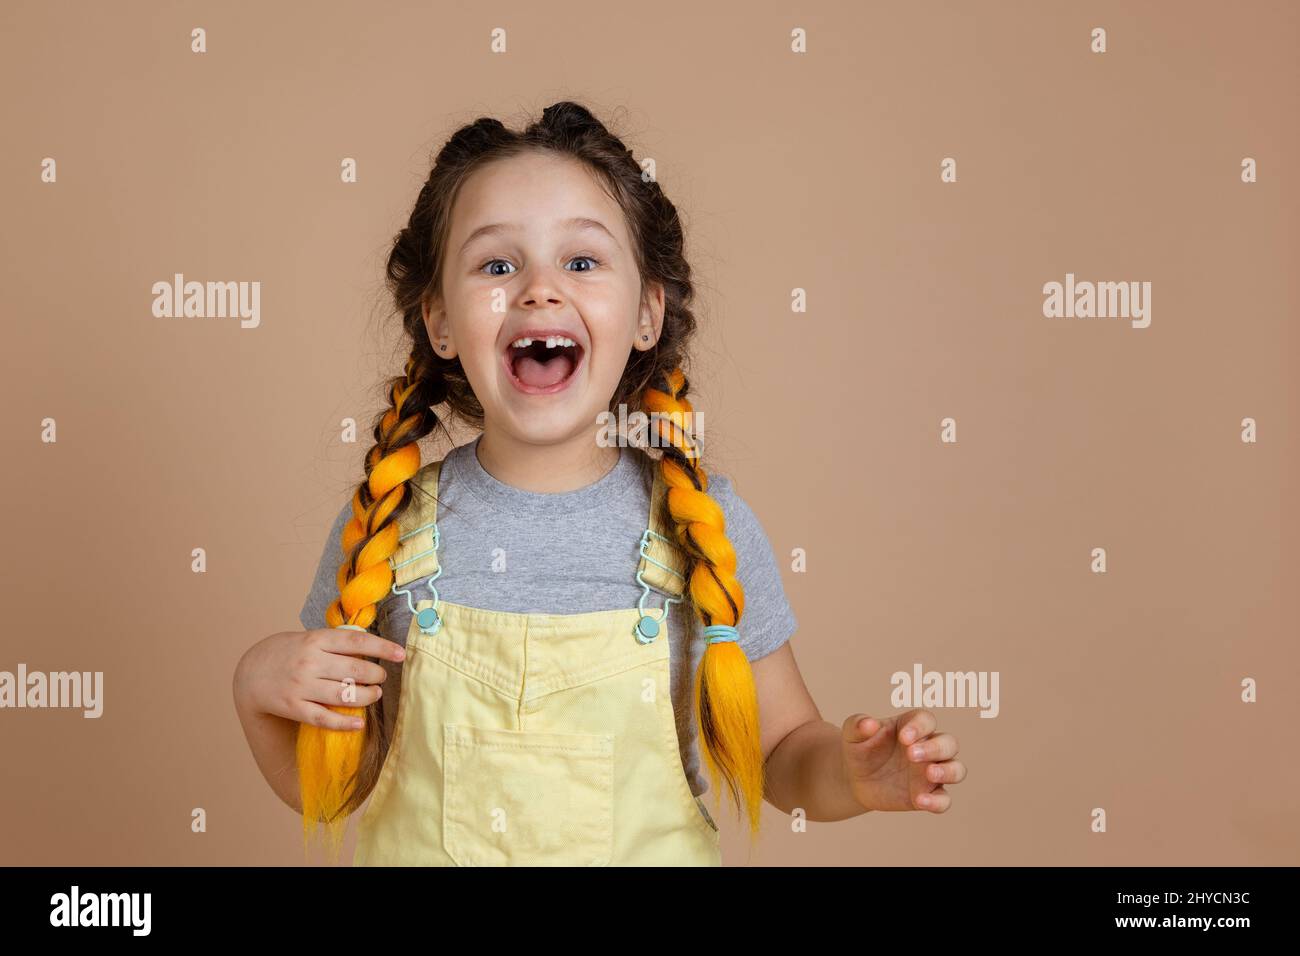 Fascinated young nice female holding yellow kanekalon pigtail with hand, smiling with missing tooth looking at camera wearing yellow jumpsuit and gray Stock Photo